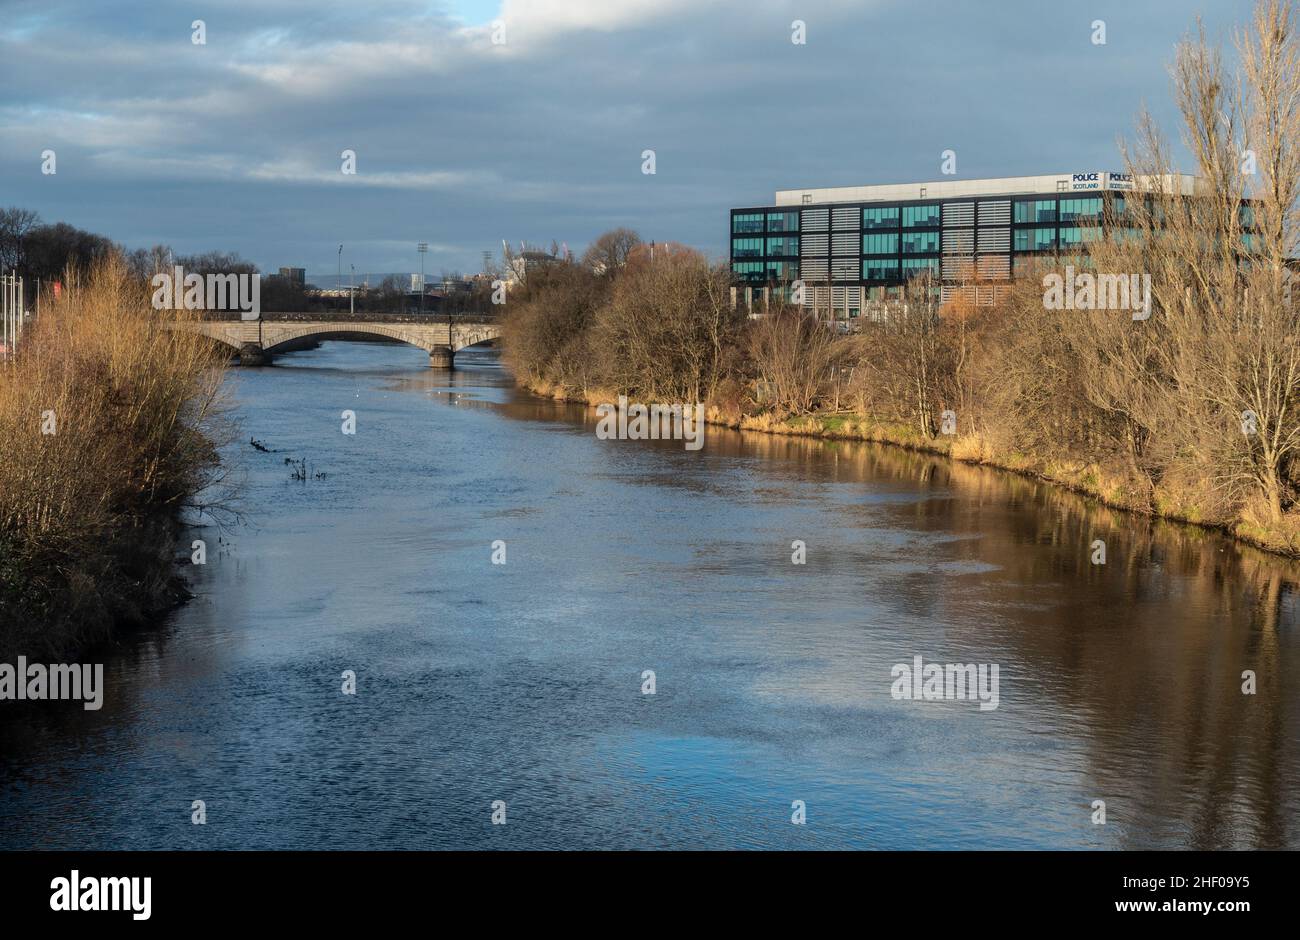 The River Clyde in Dalmarnock, Glasgow, on Christmas Day, featuring the Rutherglen Bridge and the rear of the Police Scotlnd HQ at Clyde Gateway. Stock Photo